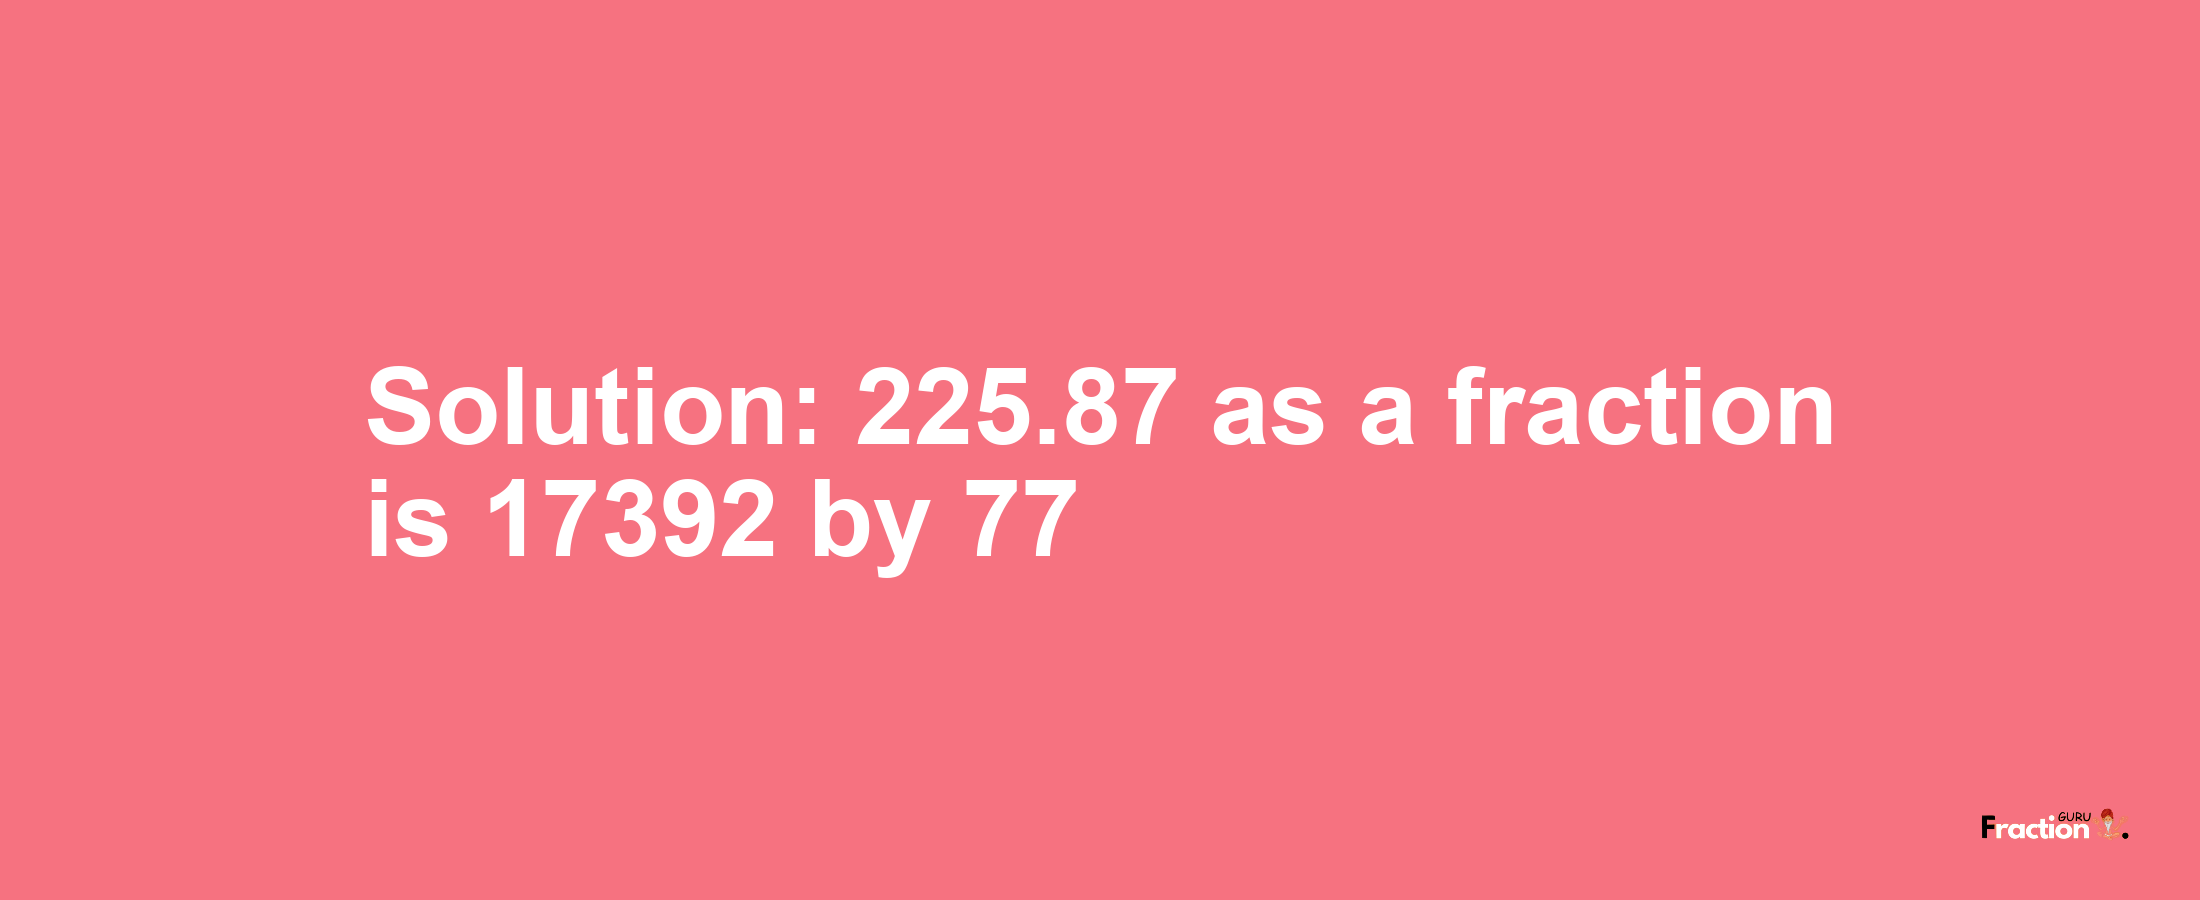 Solution:225.87 as a fraction is 17392/77